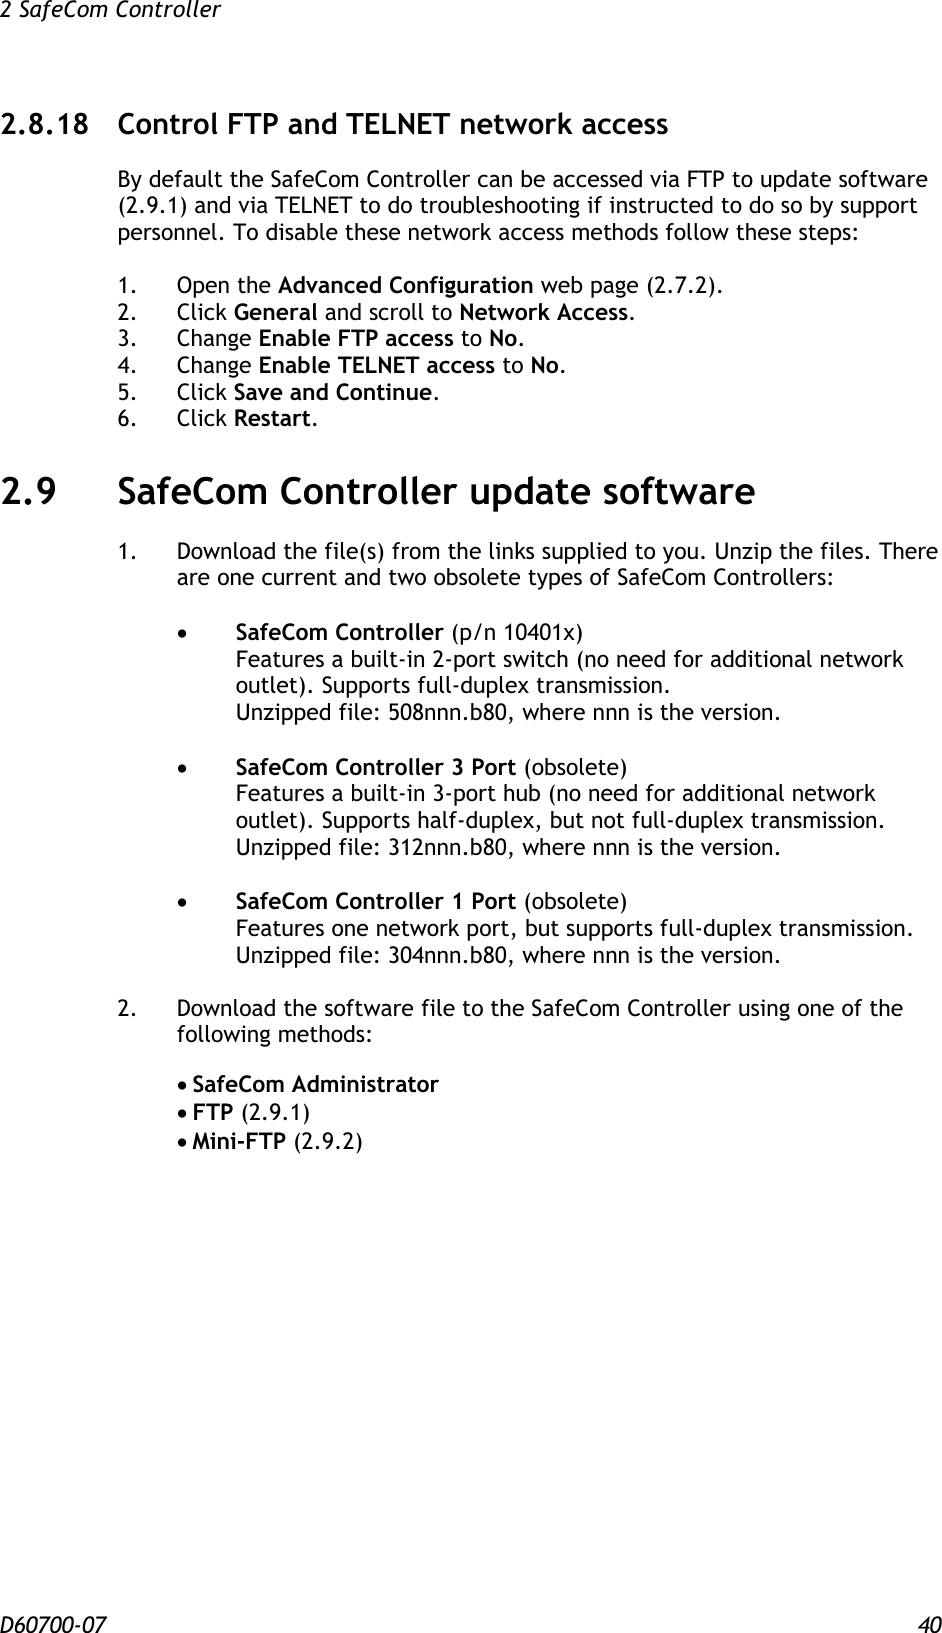 2 SafeCom Controller  D60700-07 40 2.8.18 Control FTP and TELNET network access By default the SafeCom Controller can be accessed via FTP to update software (2.9.1) and via TELNET to do troubleshooting if instructed to do so by support personnel. To disable these network access methods follow these steps:  1.  Open the Advanced Configuration web page (2.7.2). 2.  Click General and scroll to Network Access. 3.  Change Enable FTP access to No. 4.  Change Enable TELNET access to No. 5.  Click Save and Continue. 6.  Click Restart. 2.9 SafeCom Controller update software 1.  Download the file(s) from the links supplied to you. Unzip the files. There are one current and two obsolete types of SafeCom Controllers:   SafeCom Controller (p/n 10401x) Features a built-in 2-port switch (no need for additional network outlet). Supports full-duplex transmission. Unzipped file: 508nnn.b80, where nnn is the version.   SafeCom Controller 3 Port (obsolete) Features a built-in 3-port hub (no need for additional network outlet). Supports half-duplex, but not full-duplex transmission. Unzipped file: 312nnn.b80, where nnn is the version.   SafeCom Controller 1 Port (obsolete) Features one network port, but supports full-duplex transmission. Unzipped file: 304nnn.b80, where nnn is the version.  2.  Download the software file to the SafeCom Controller using one of the following methods:    SafeCom Administrator  FTP (2.9.1)  Mini-FTP (2.9.2)   